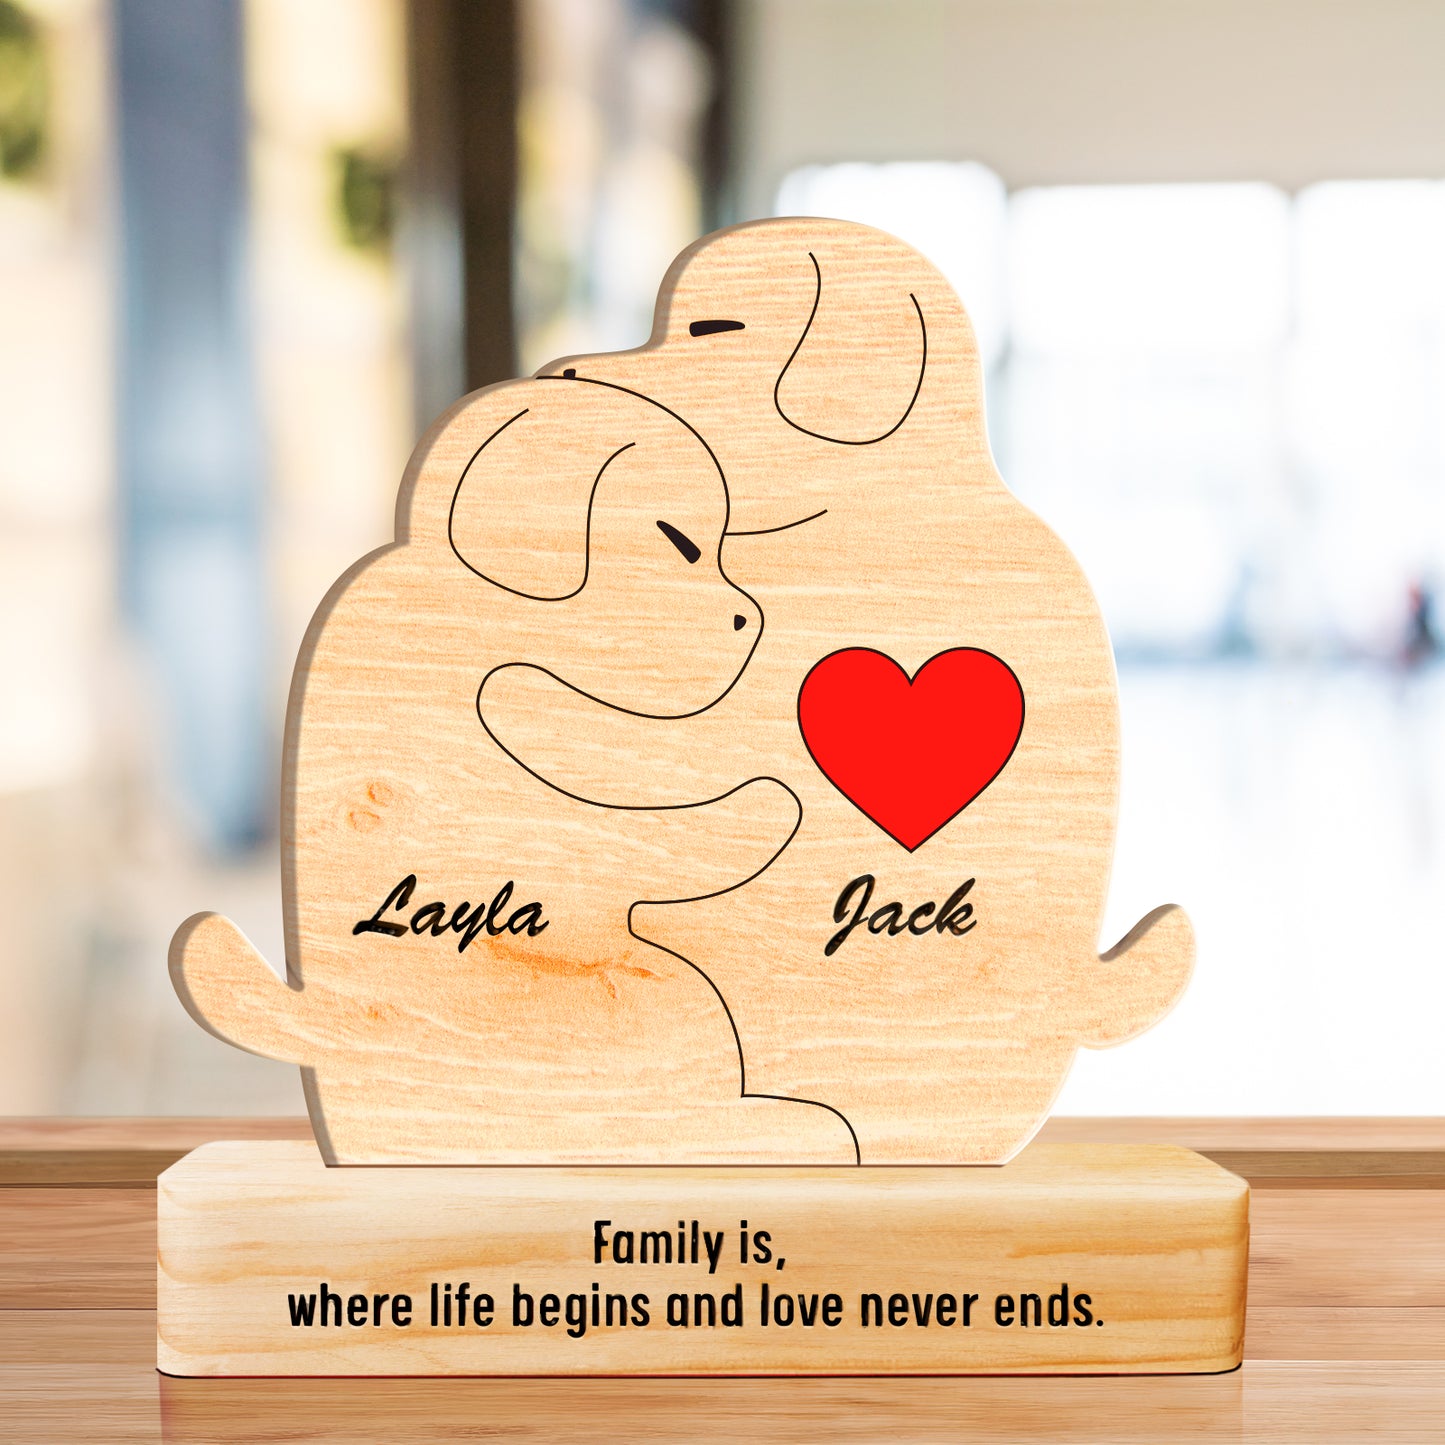 Family - Cute Dog Family - Personalized Wooden Puzzle